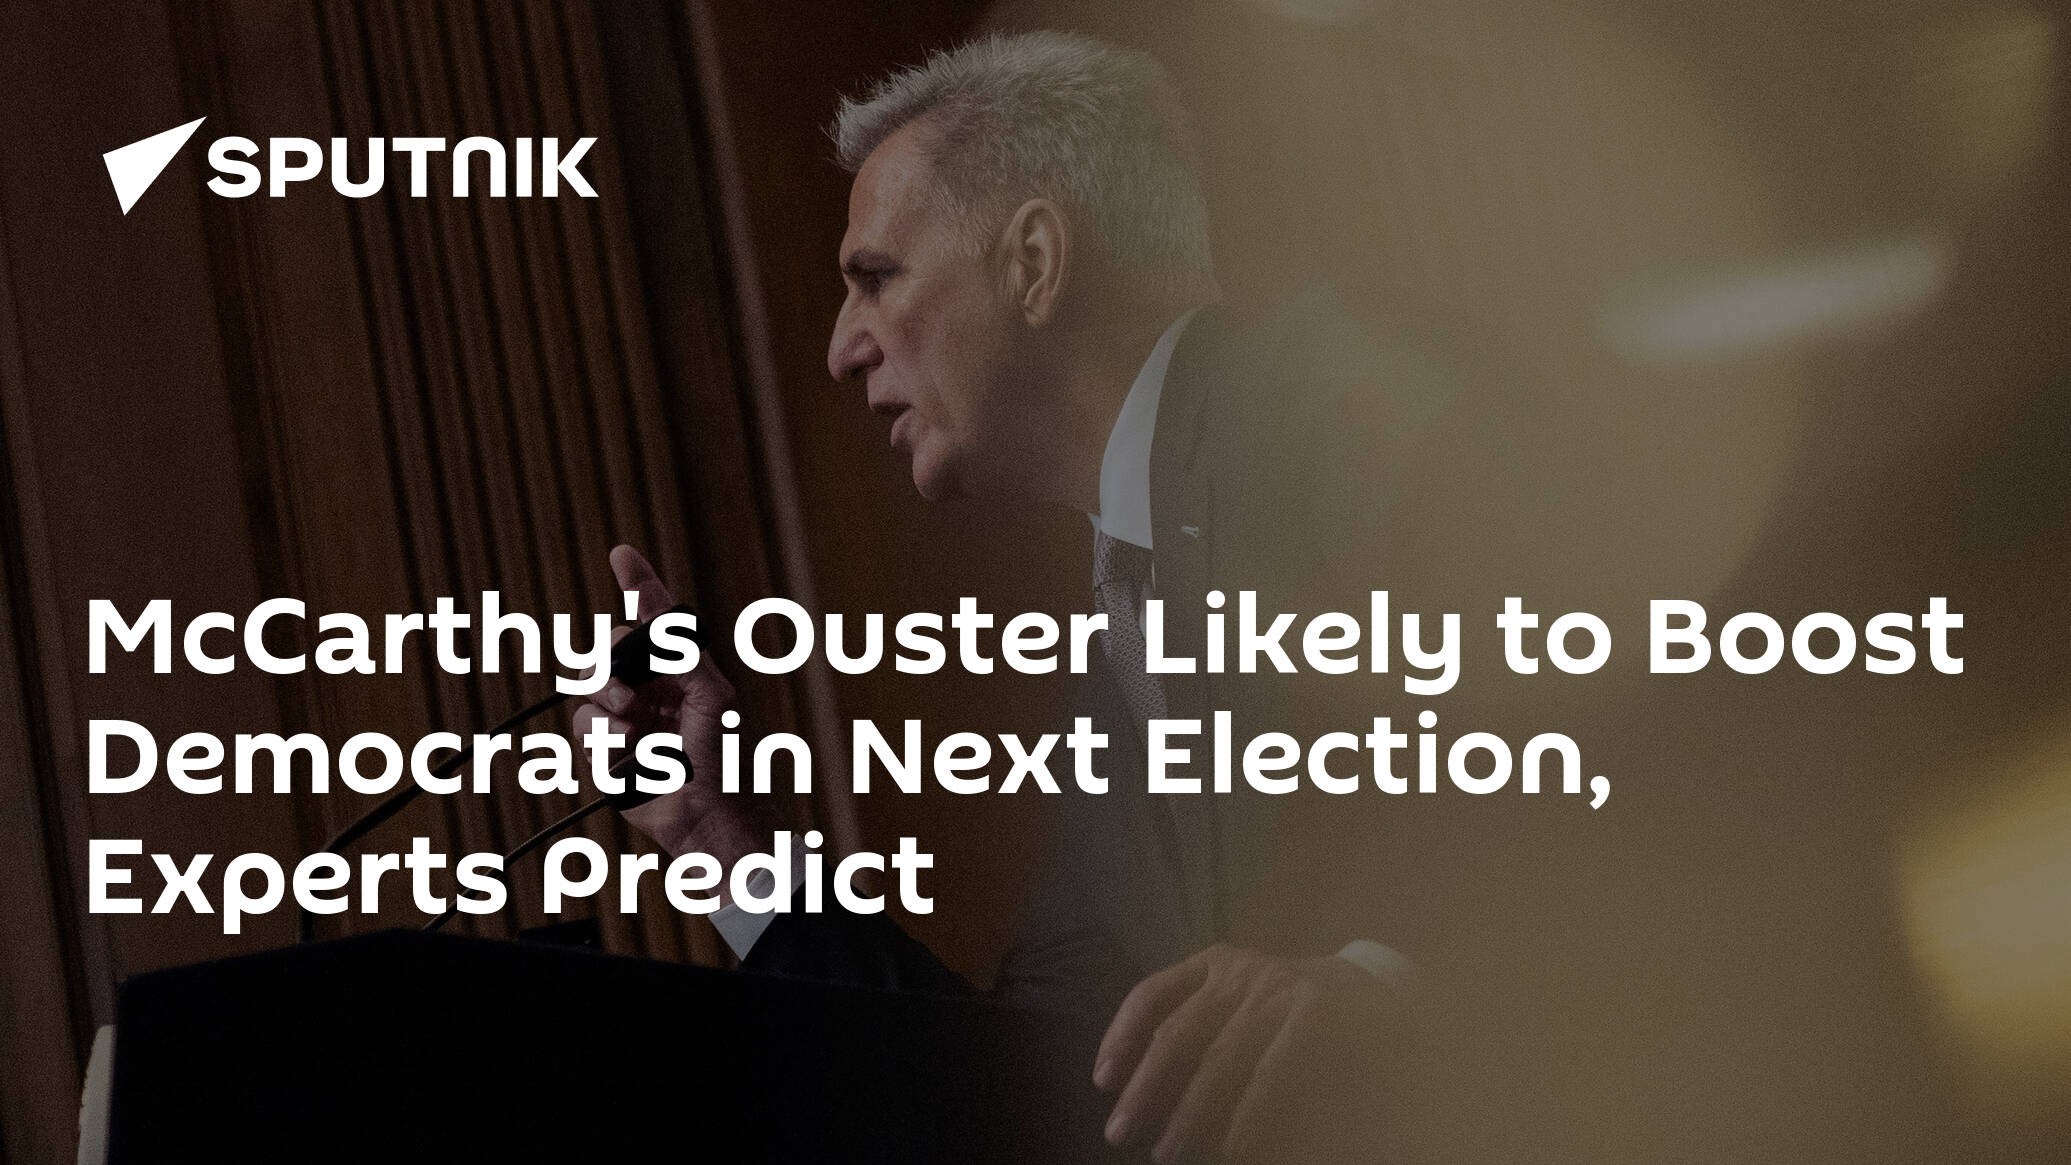 McCarthy's Ouster Likely to Boost Democrats in Next Election, Experts Predict